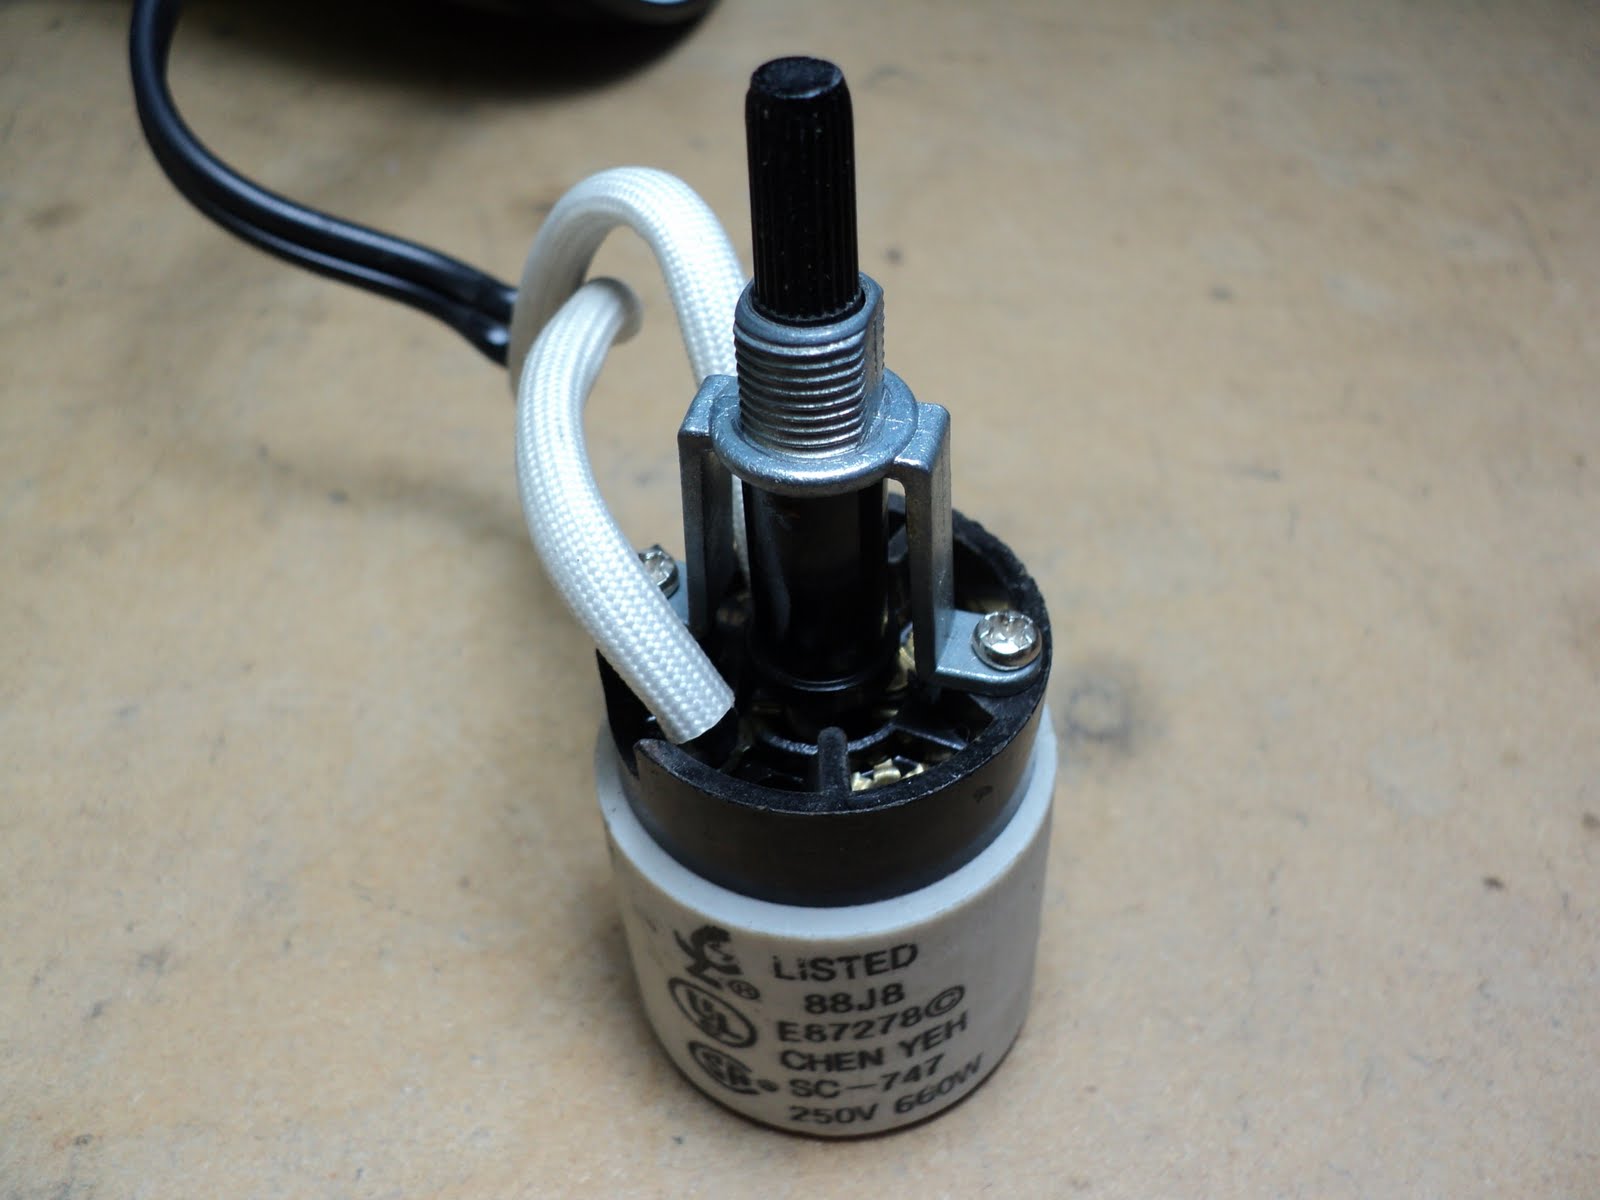 A Rotary Switch Repair, How To Replace A Rotary Switch On Lamp